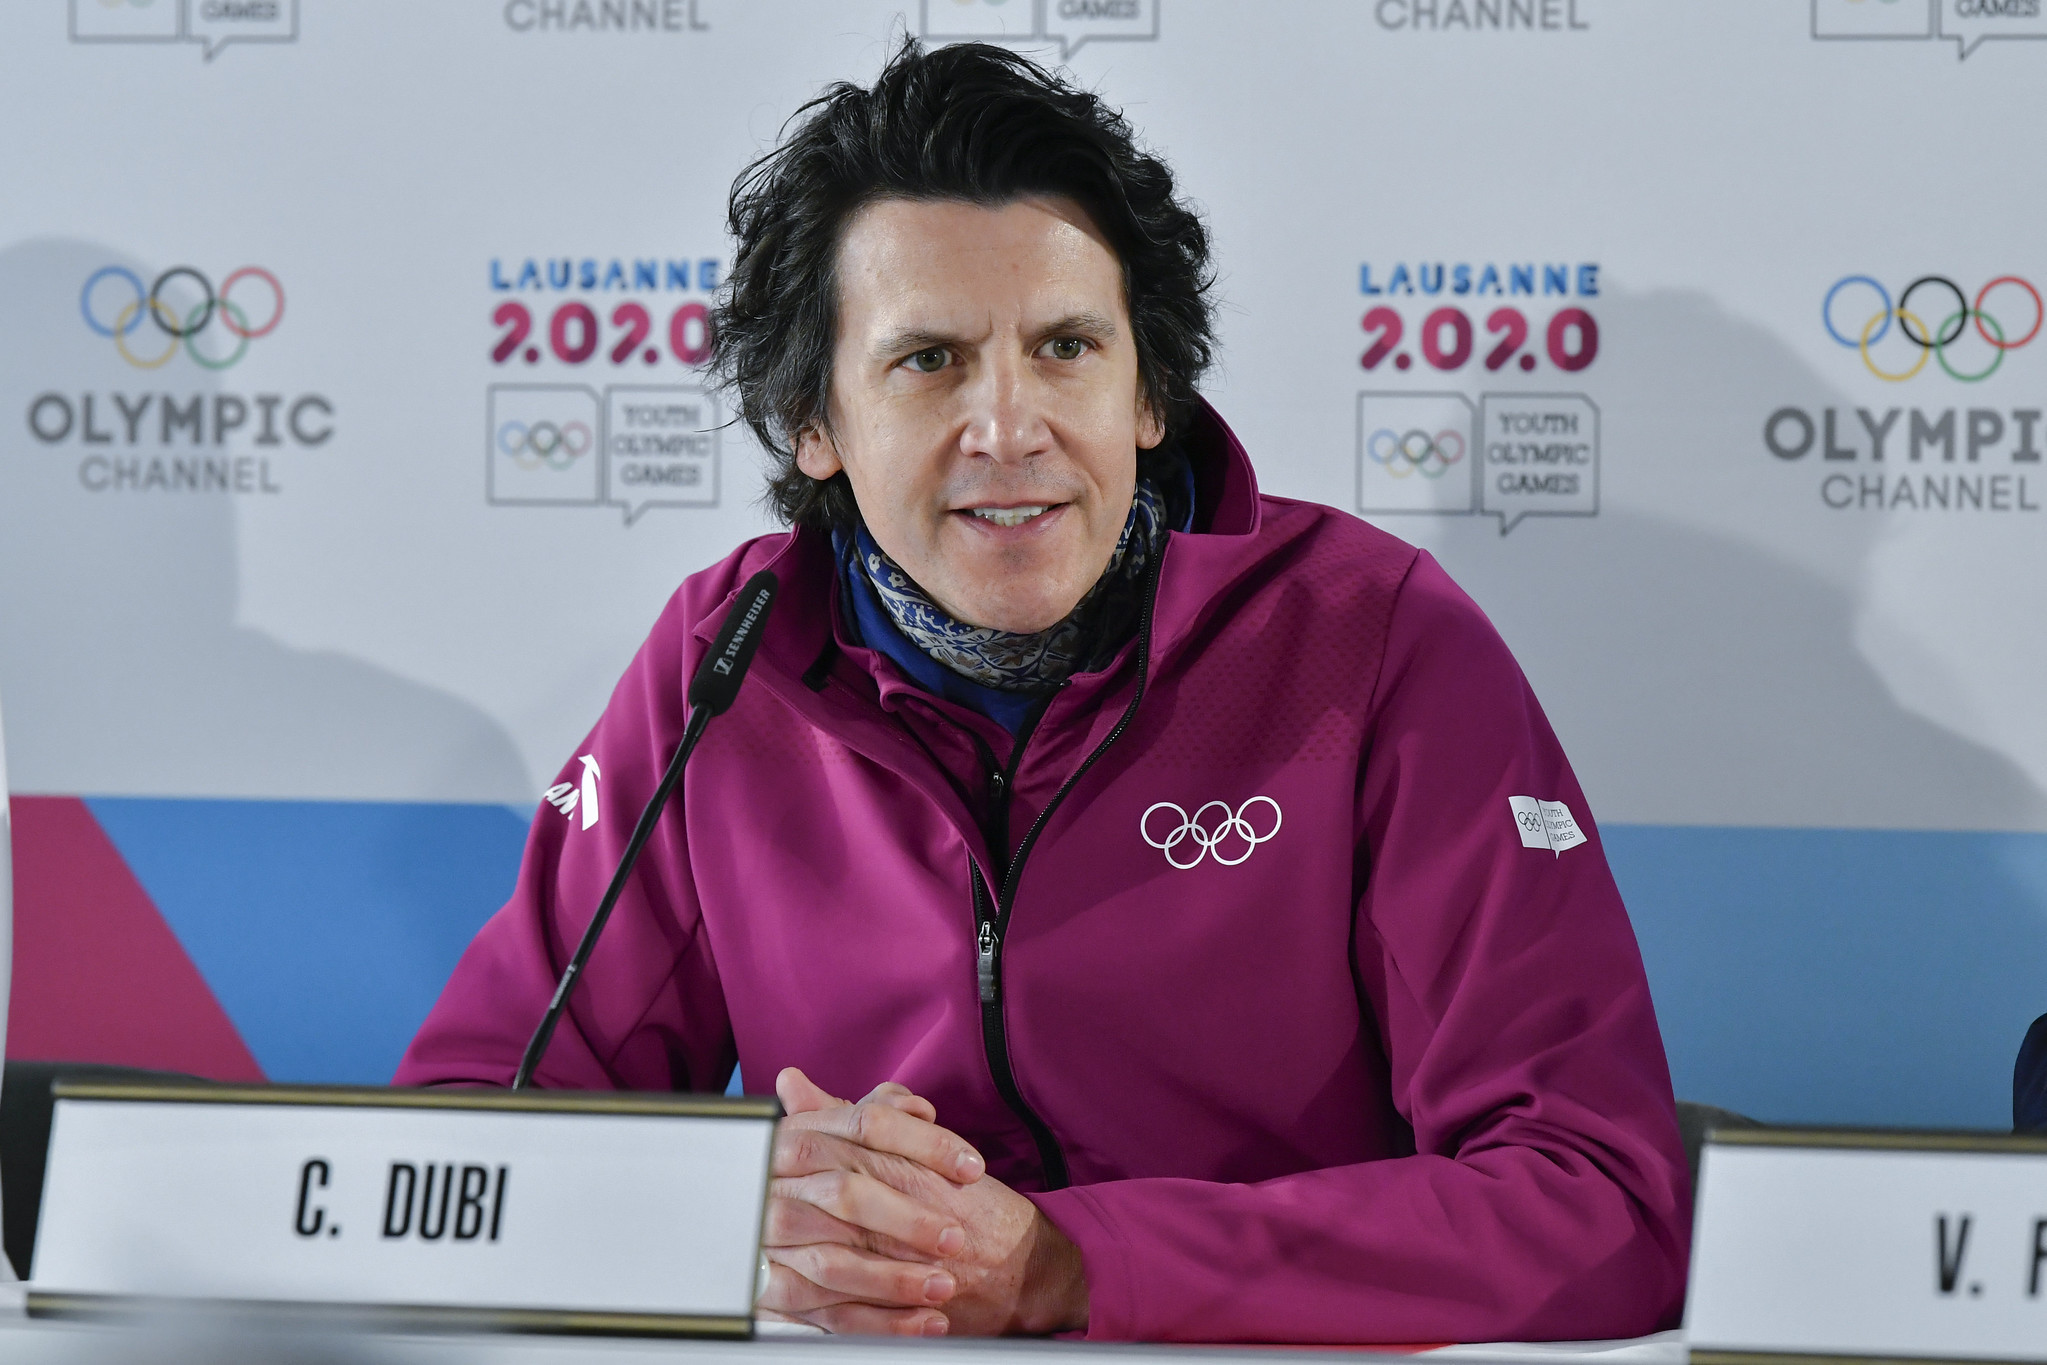 IOC executive director for the Olympic Games Christophe Dubi praised Lausanne 2020 at the halfway stage ©IOC